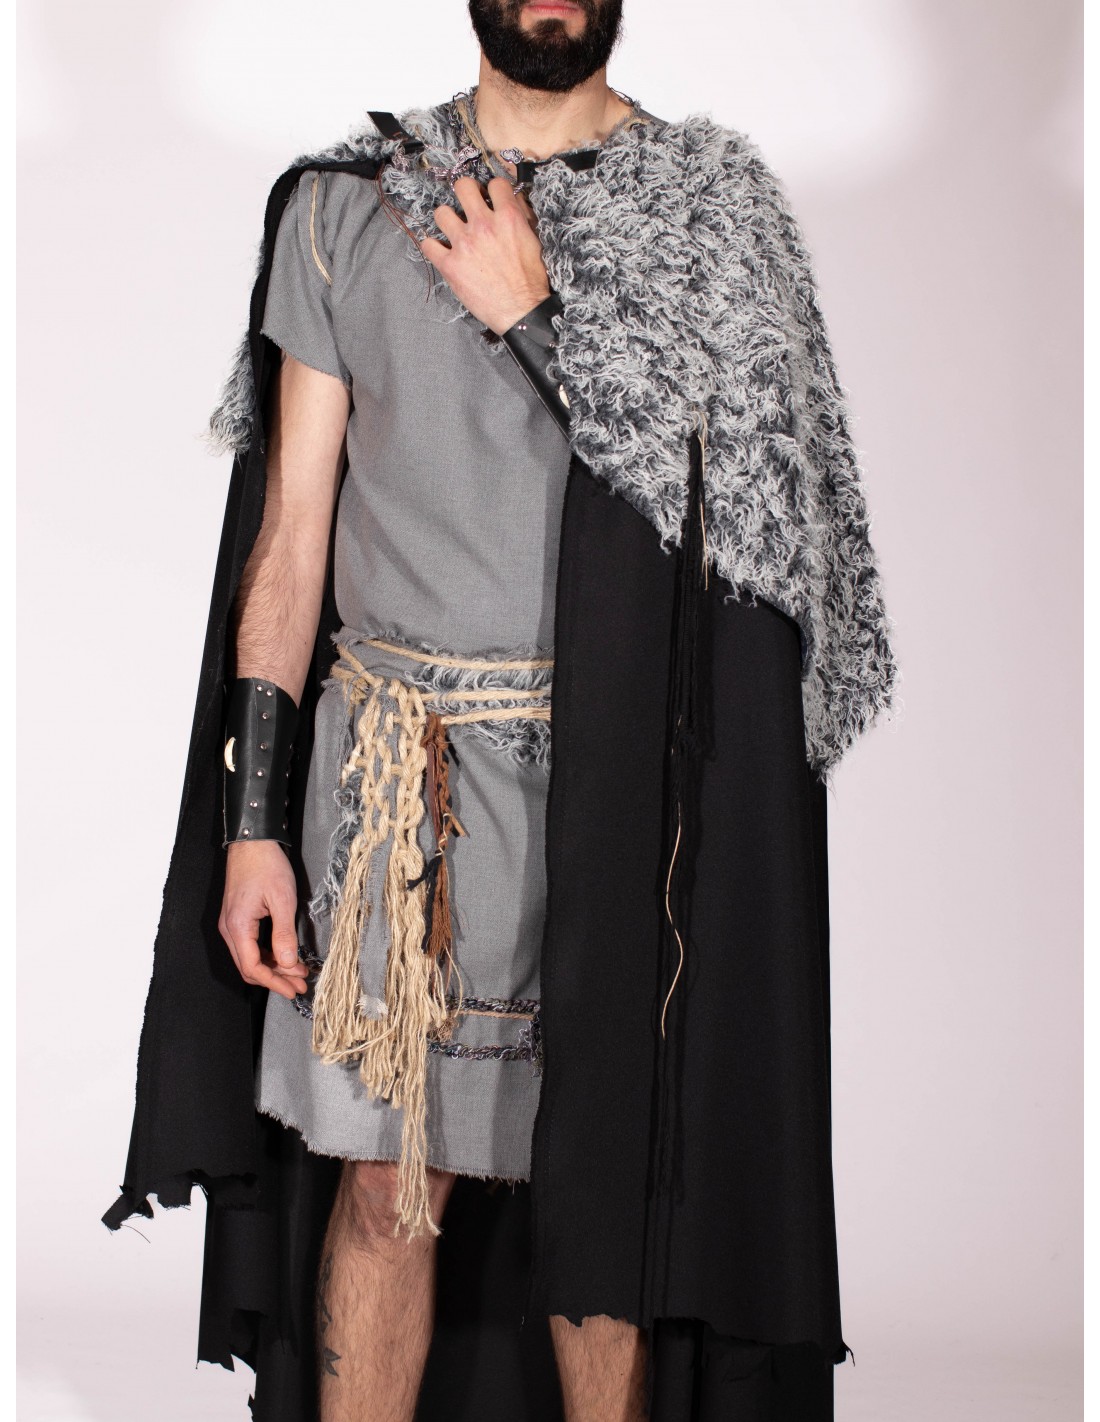 Men's medieval costume with recycled fabric Valens